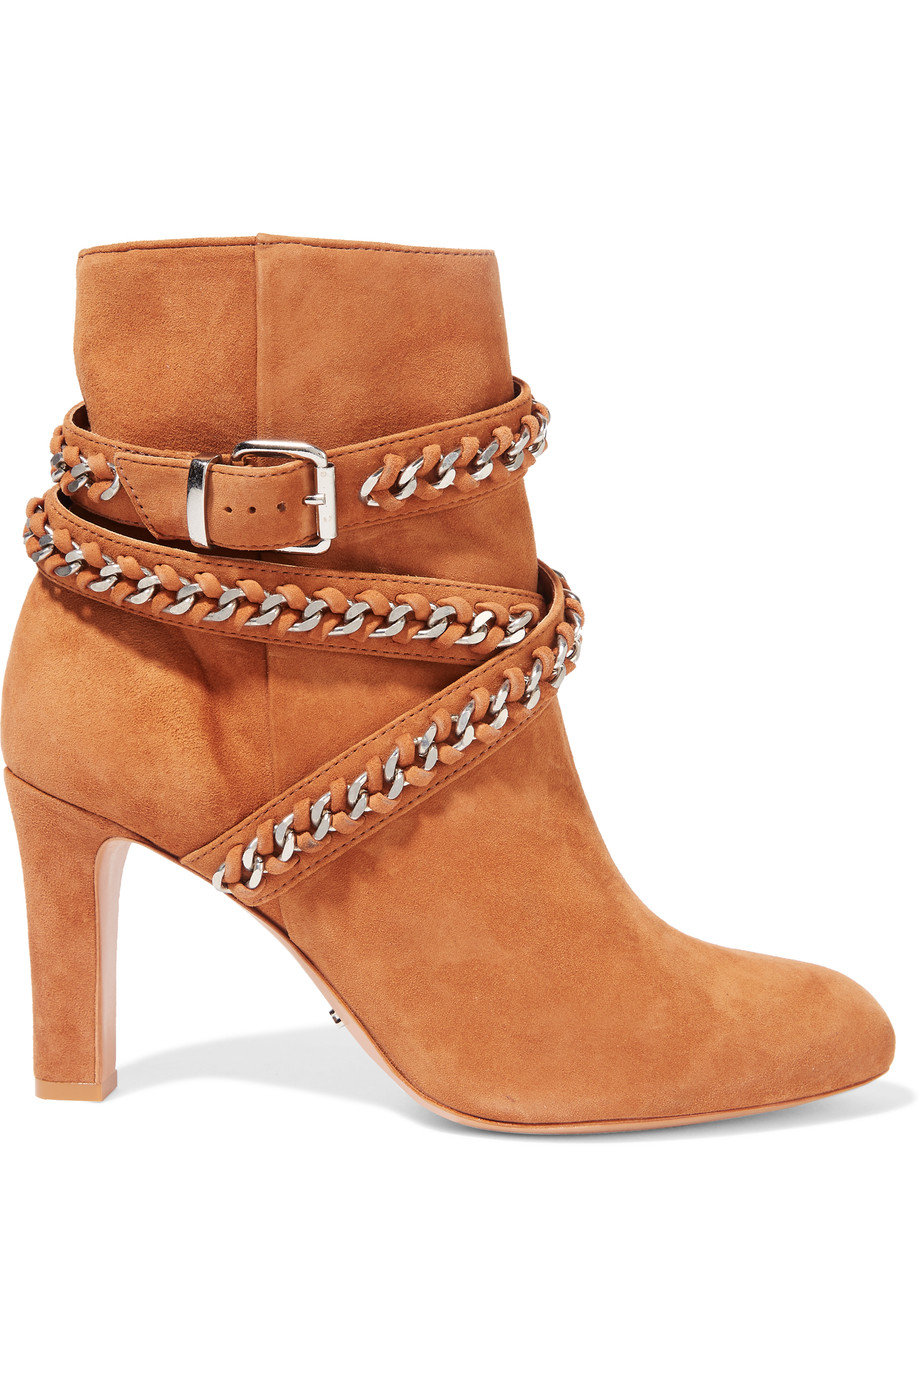 Schutz Chain-embellished Suede Ankle Boots | ModeSens